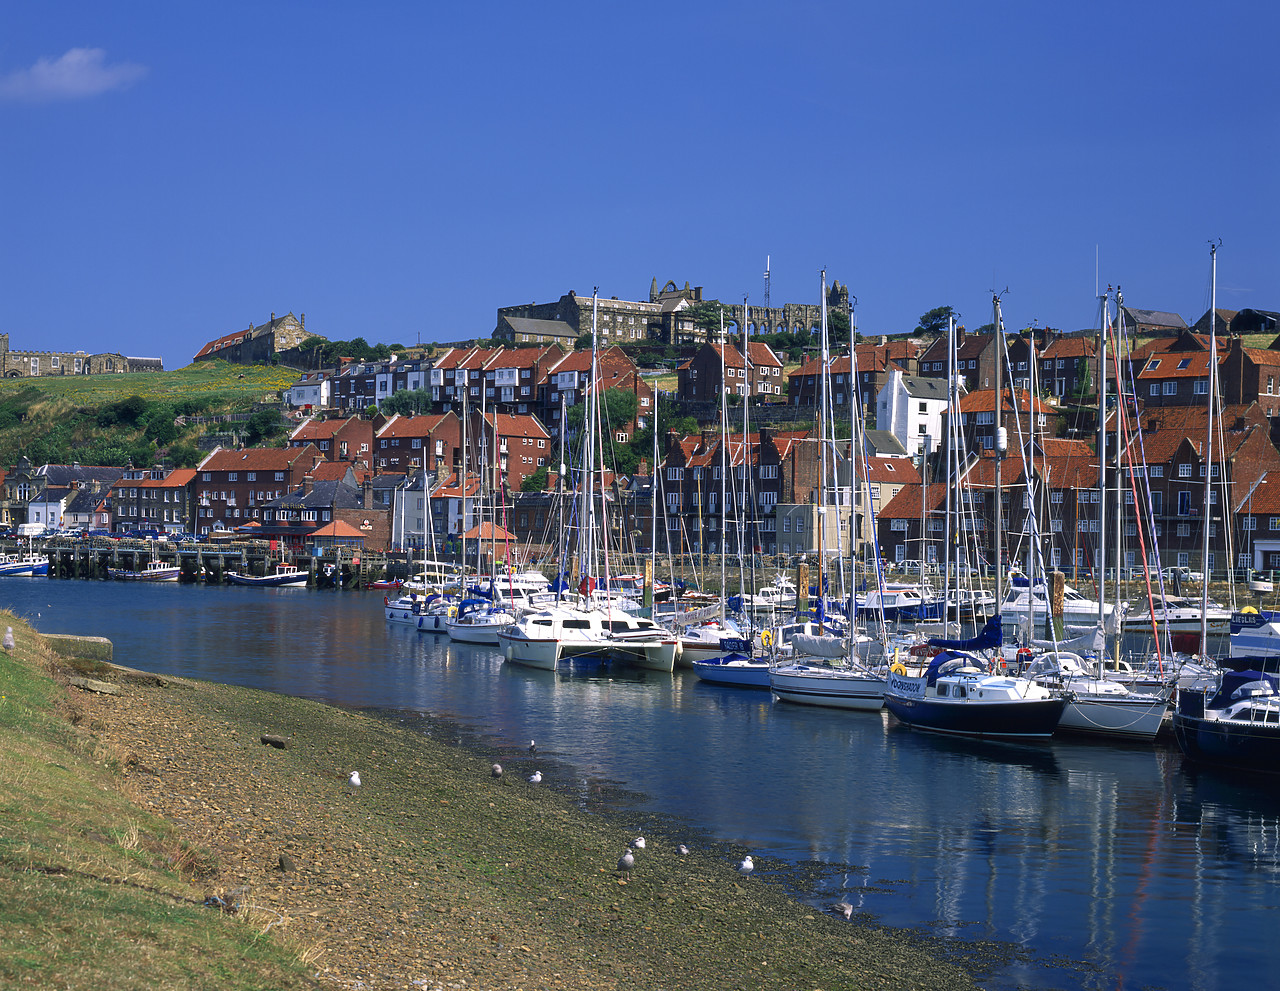 #980986-1 - Whitby Harbour, North Yorkshire, England